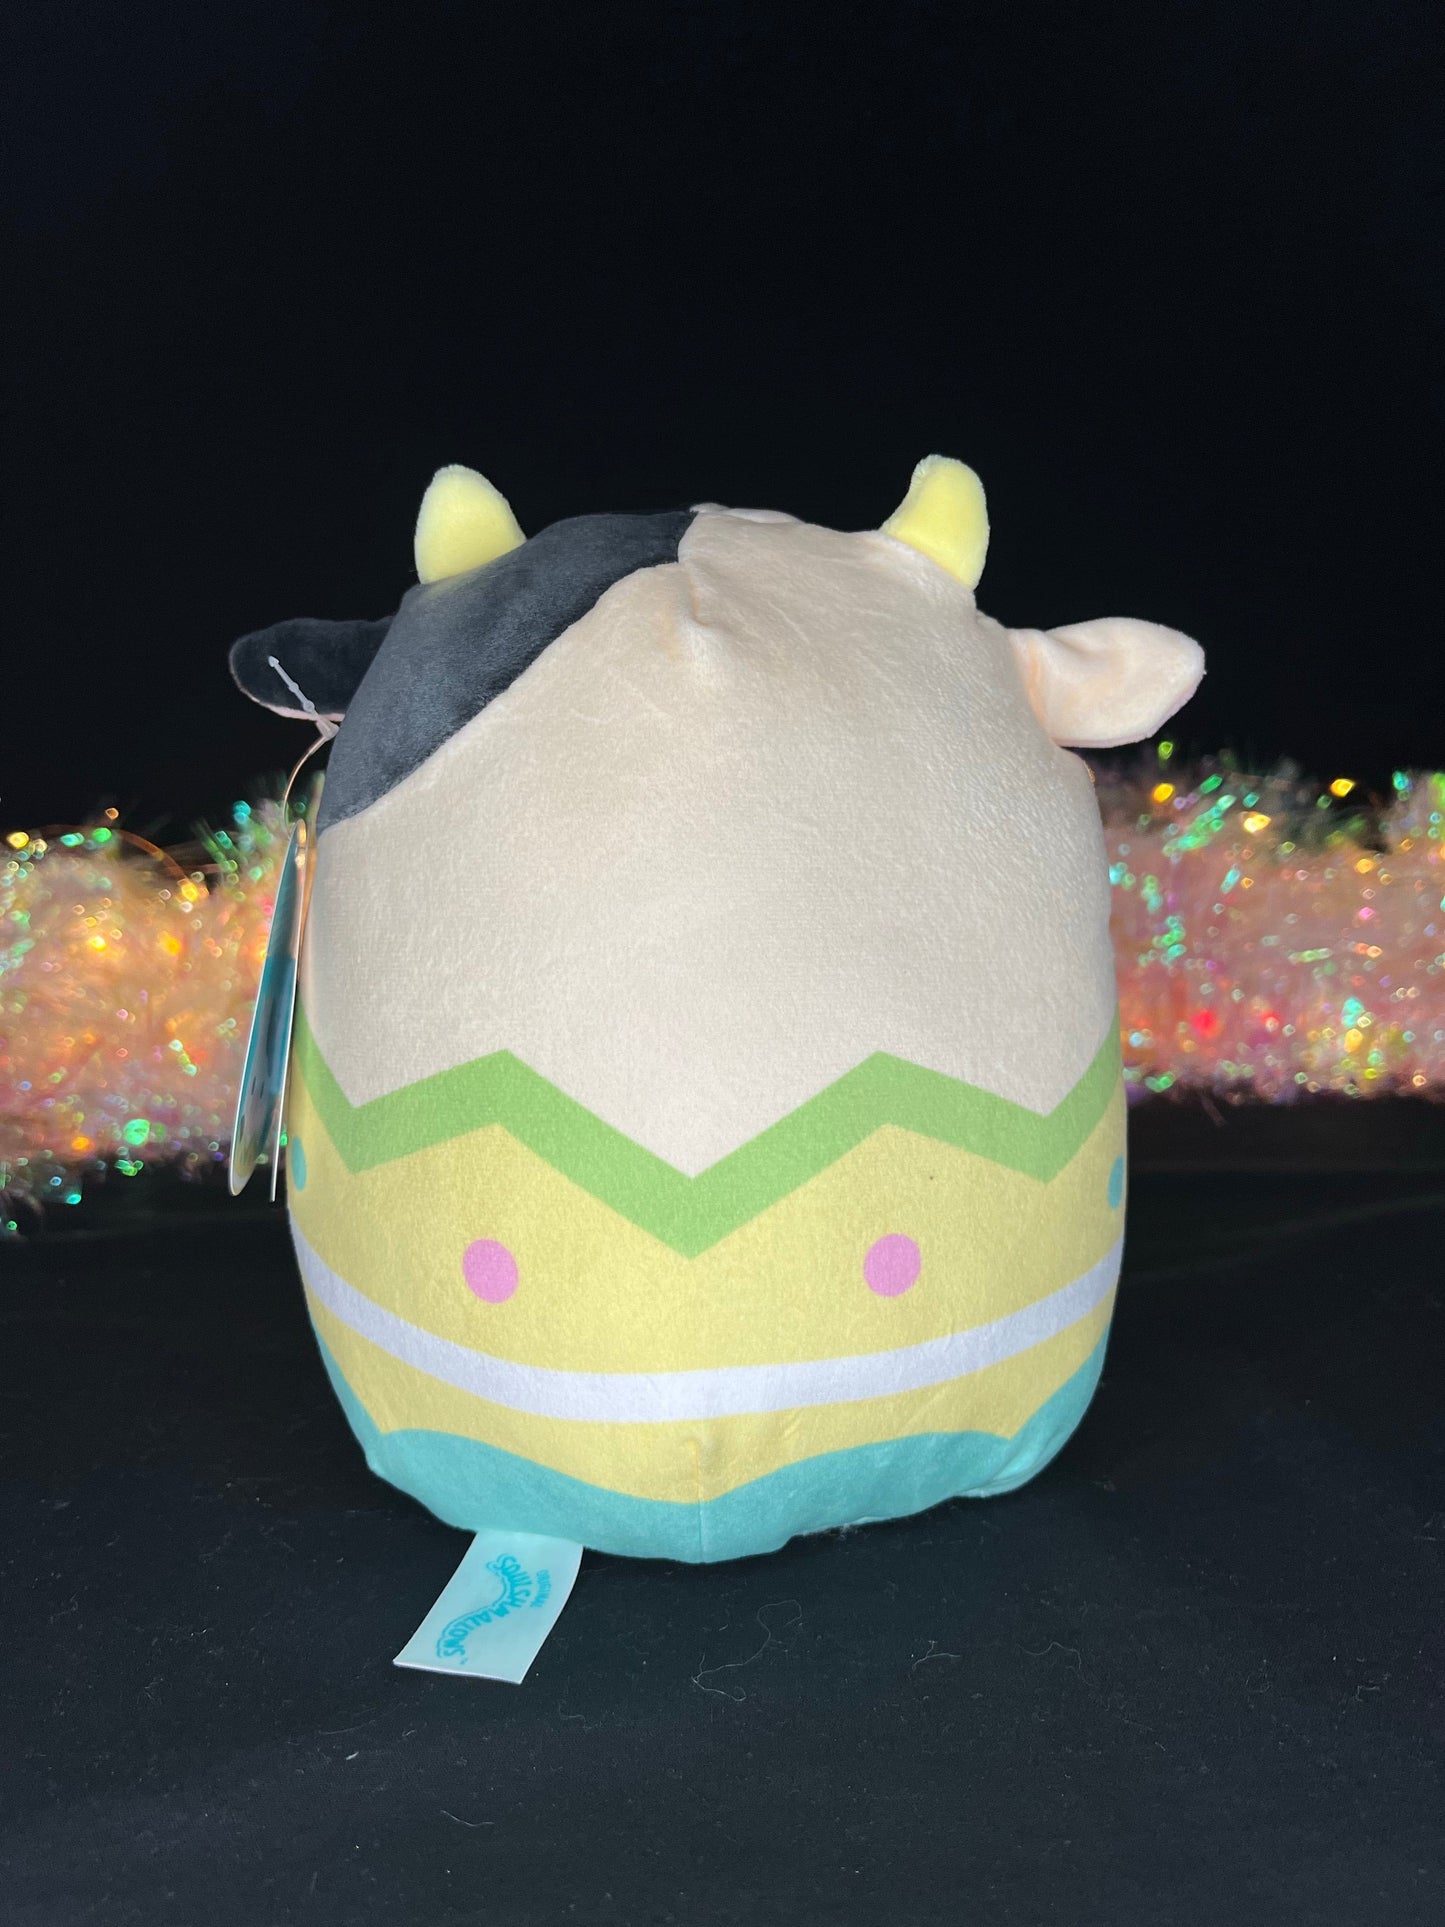 Squishmallow 8” Connor the Easter Cow.